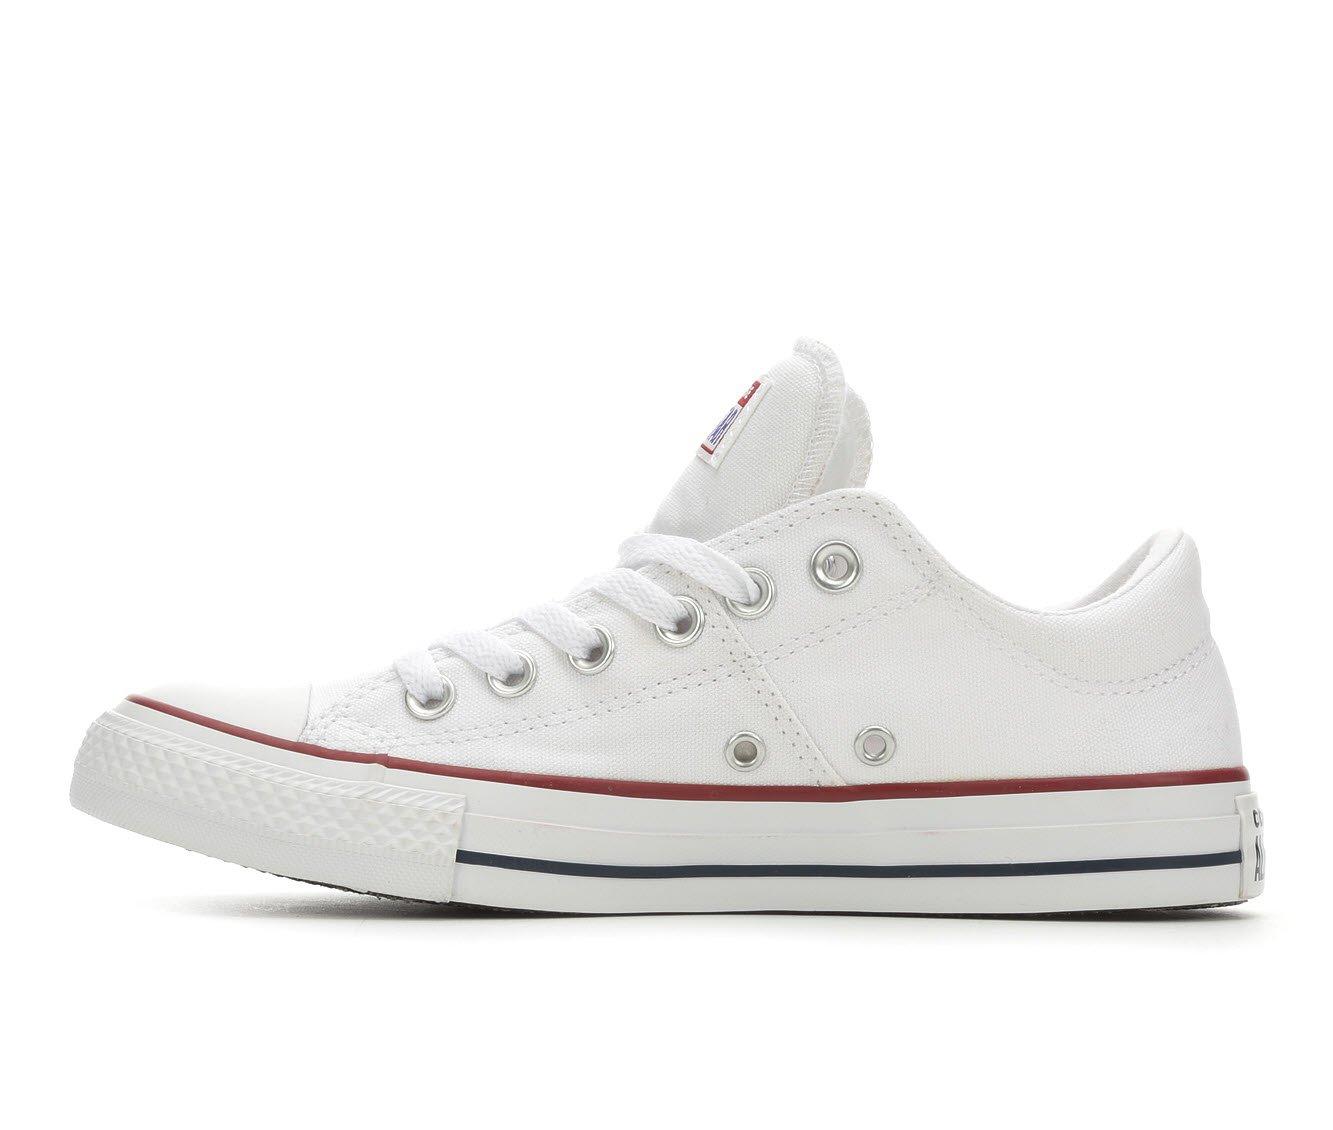 Women's Converse Chuck Taylor All Star Madison Ox Casual Sneakers